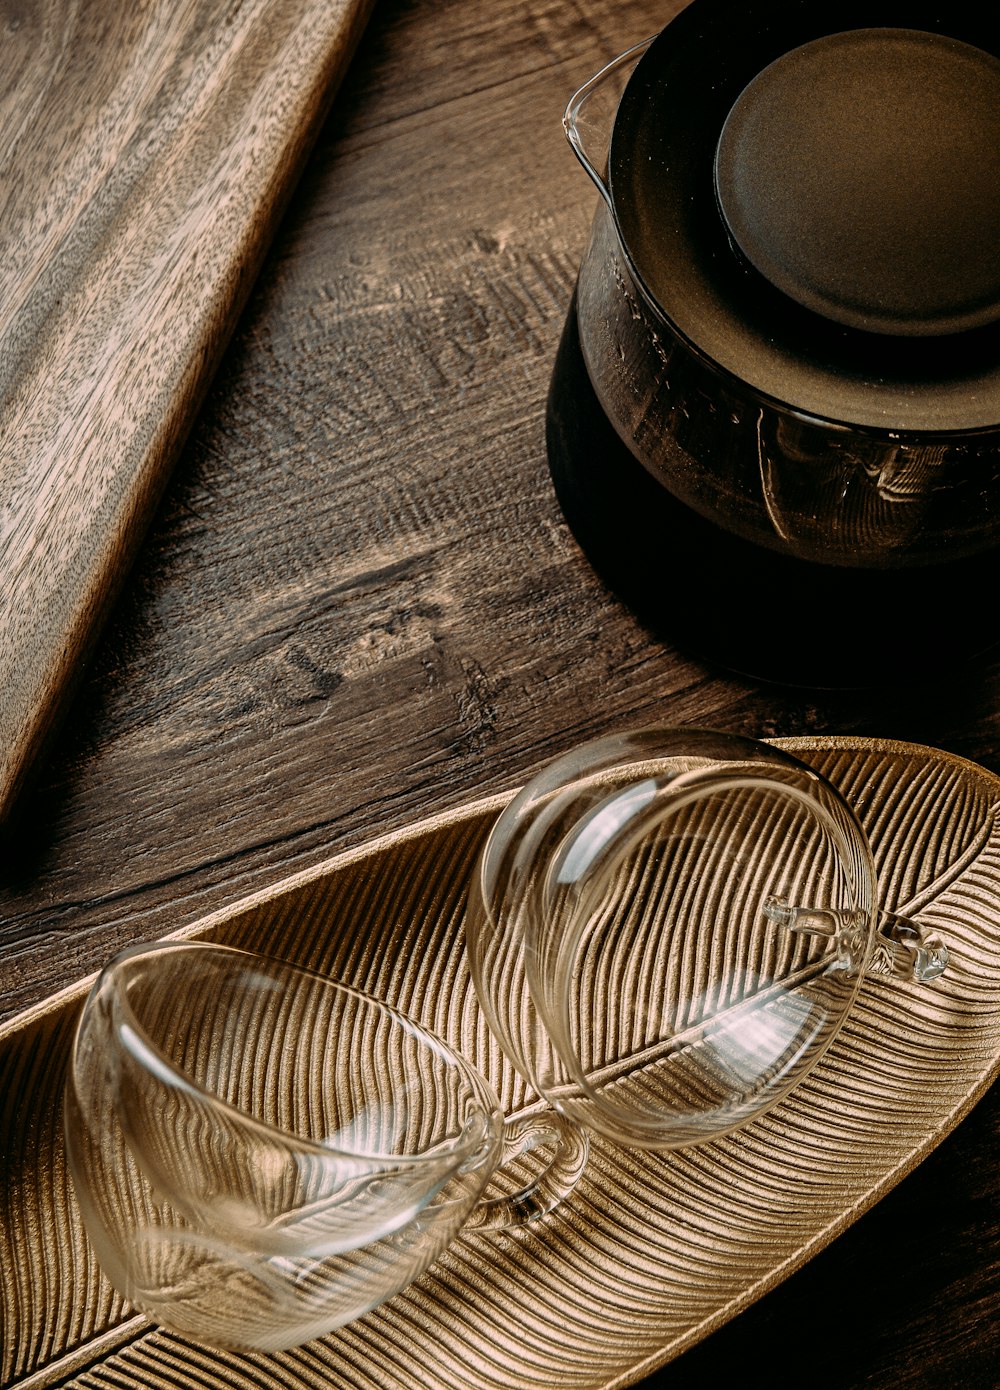 a pair of glasses sitting on top of a wooden plate